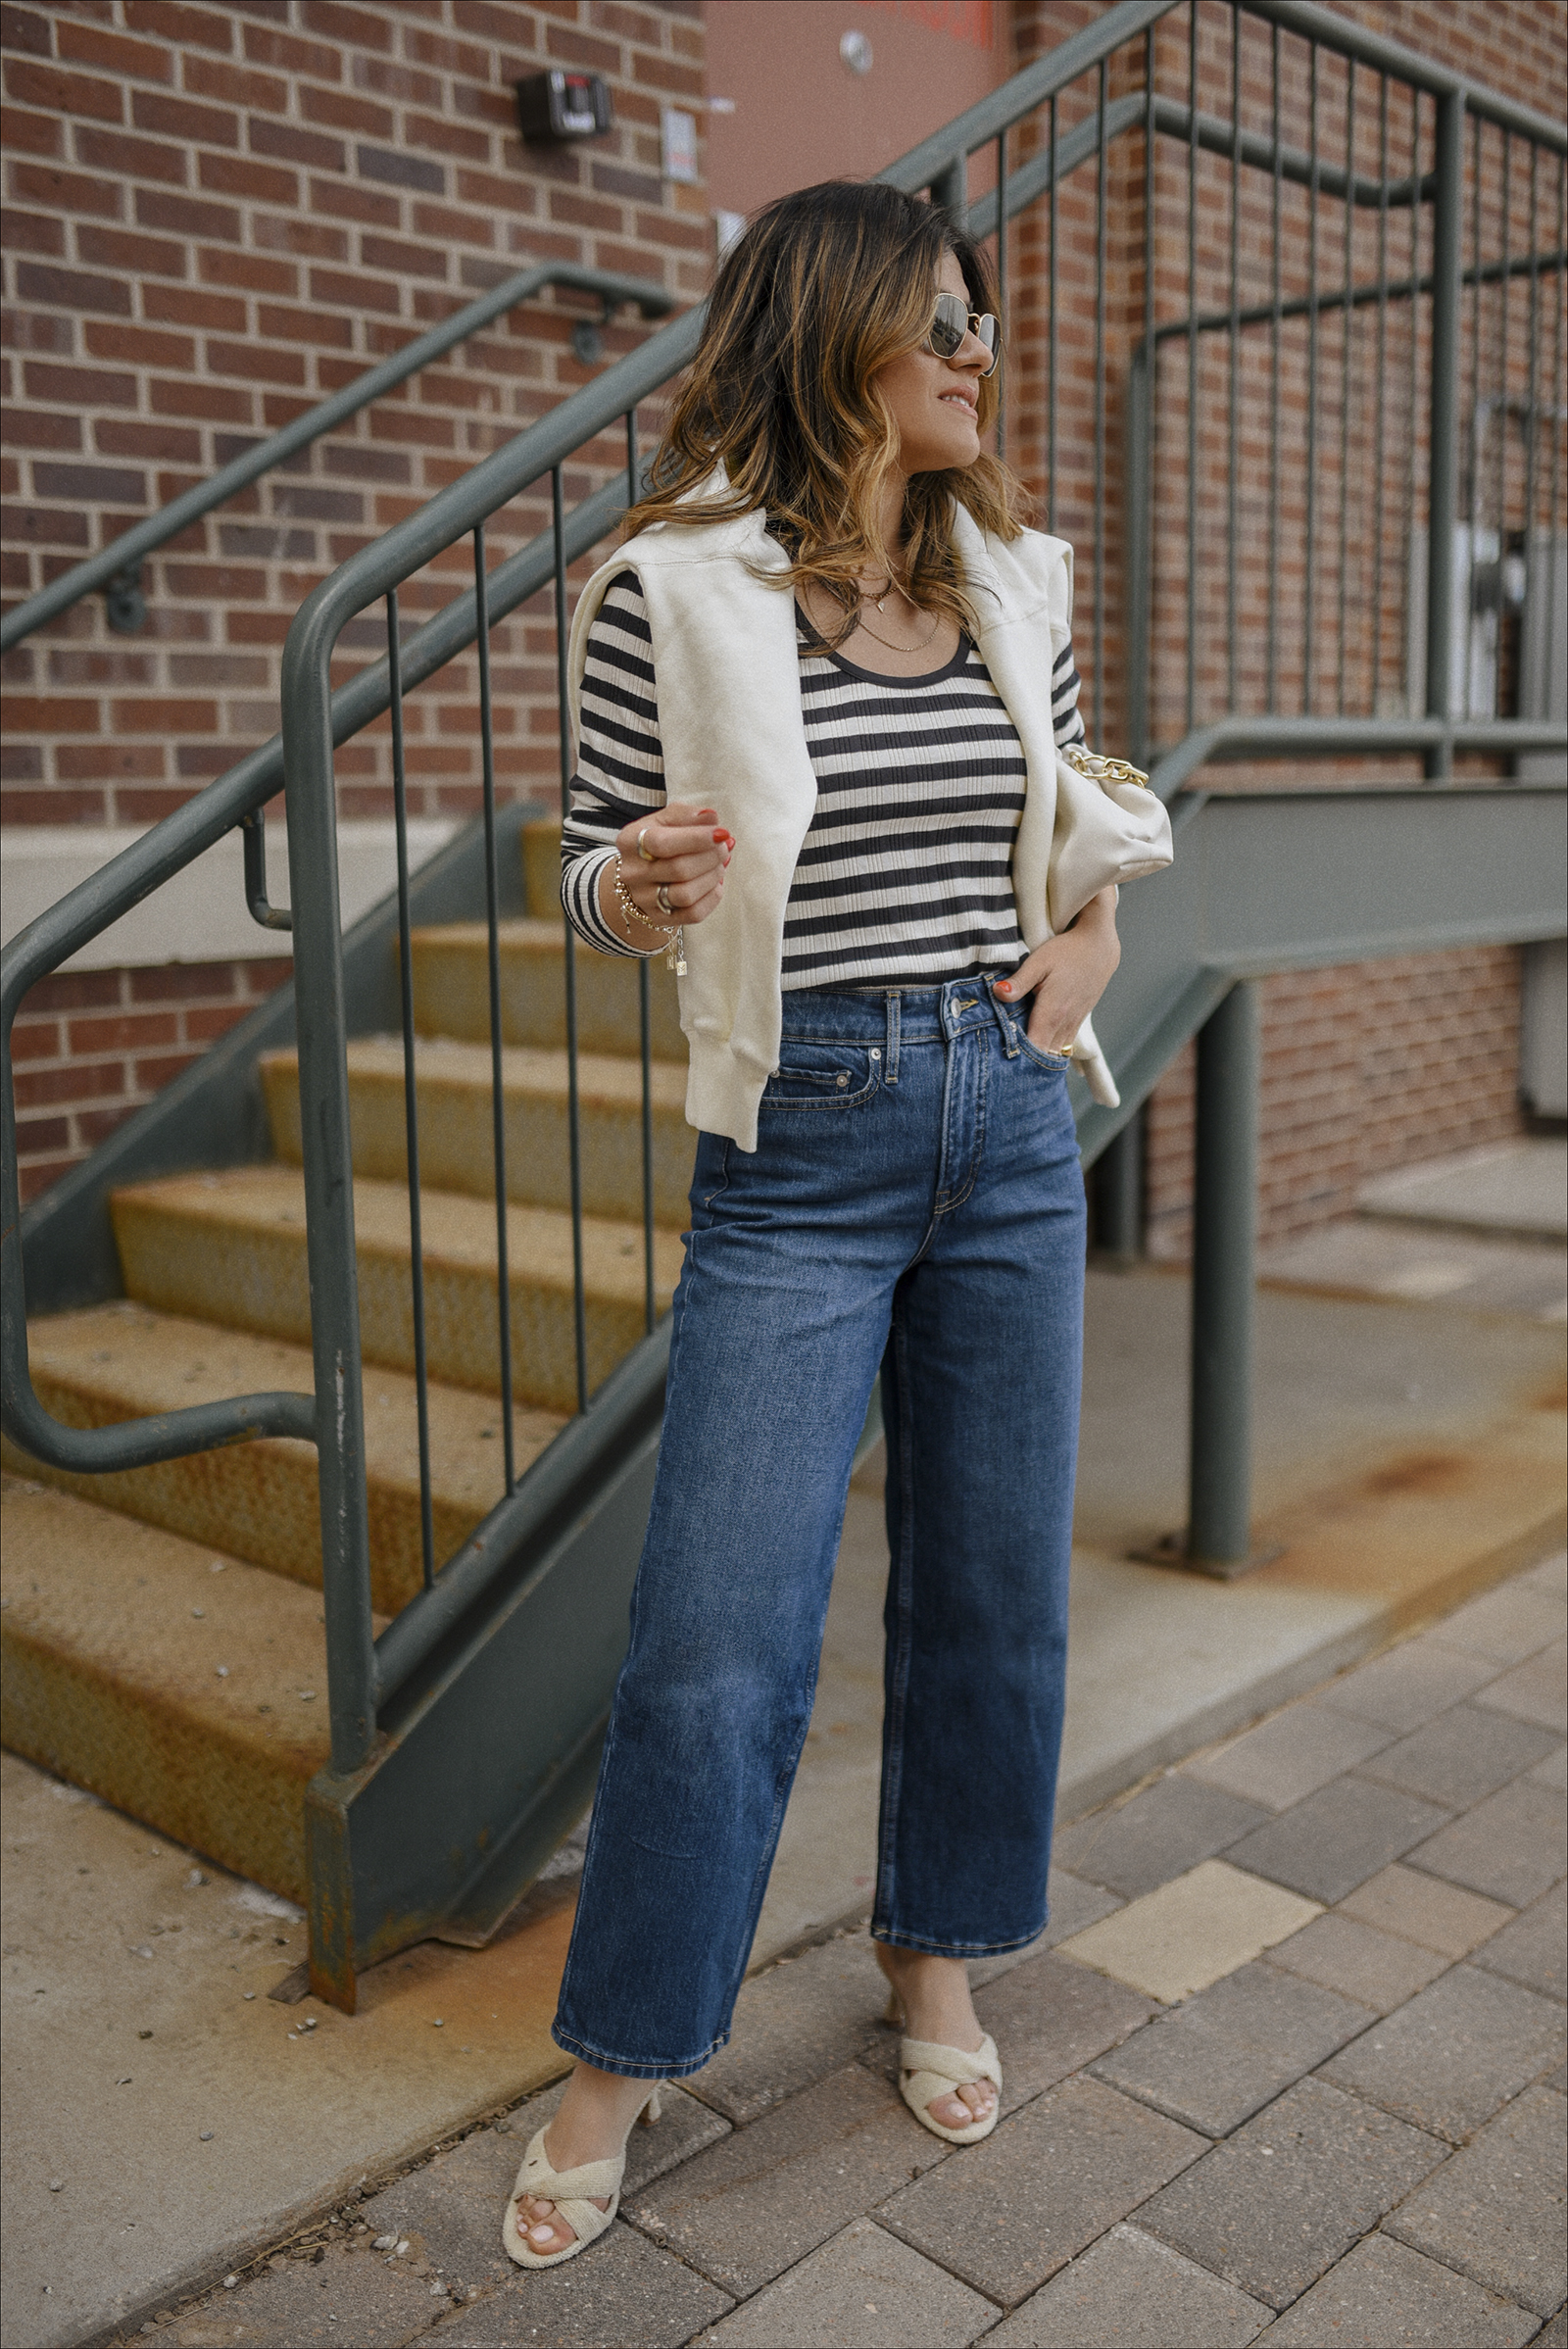 Outfits I'm Loving Lately: Spring Fashion Inspiration (+ a